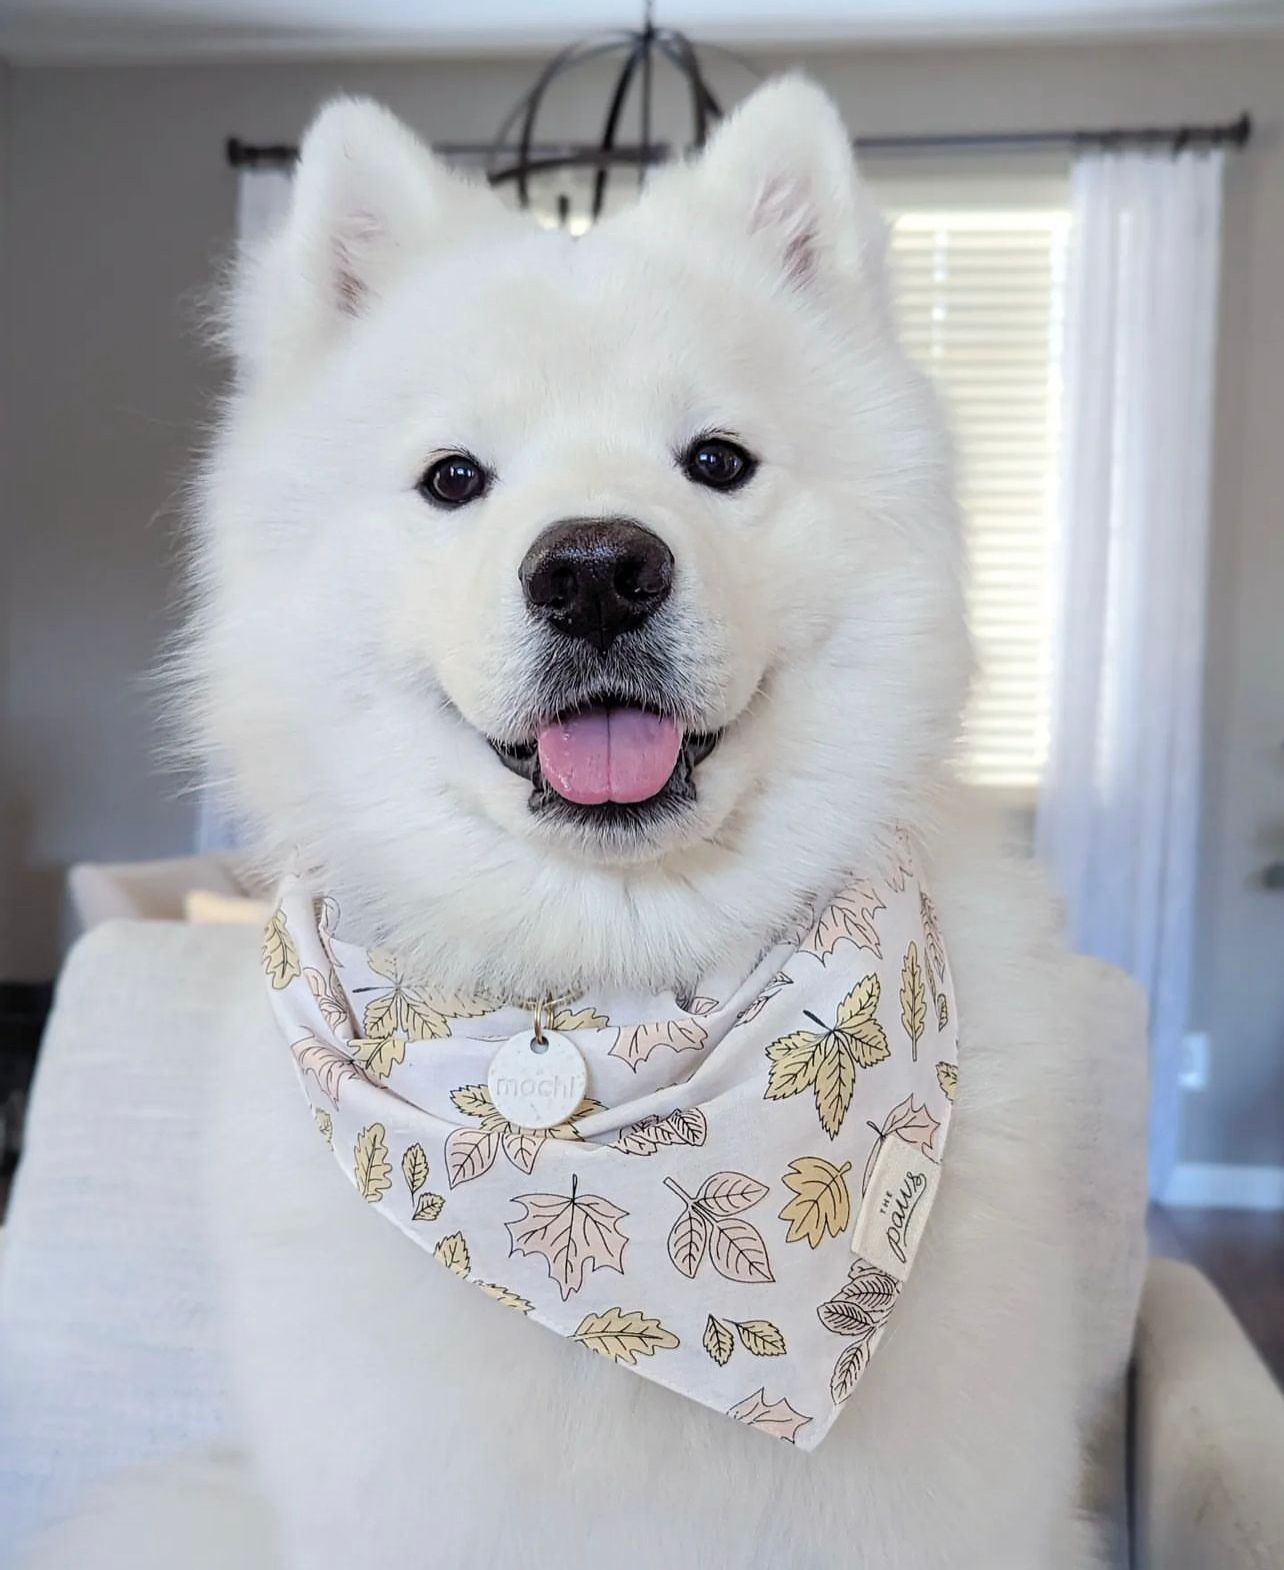 Hills Bandana from The Paws